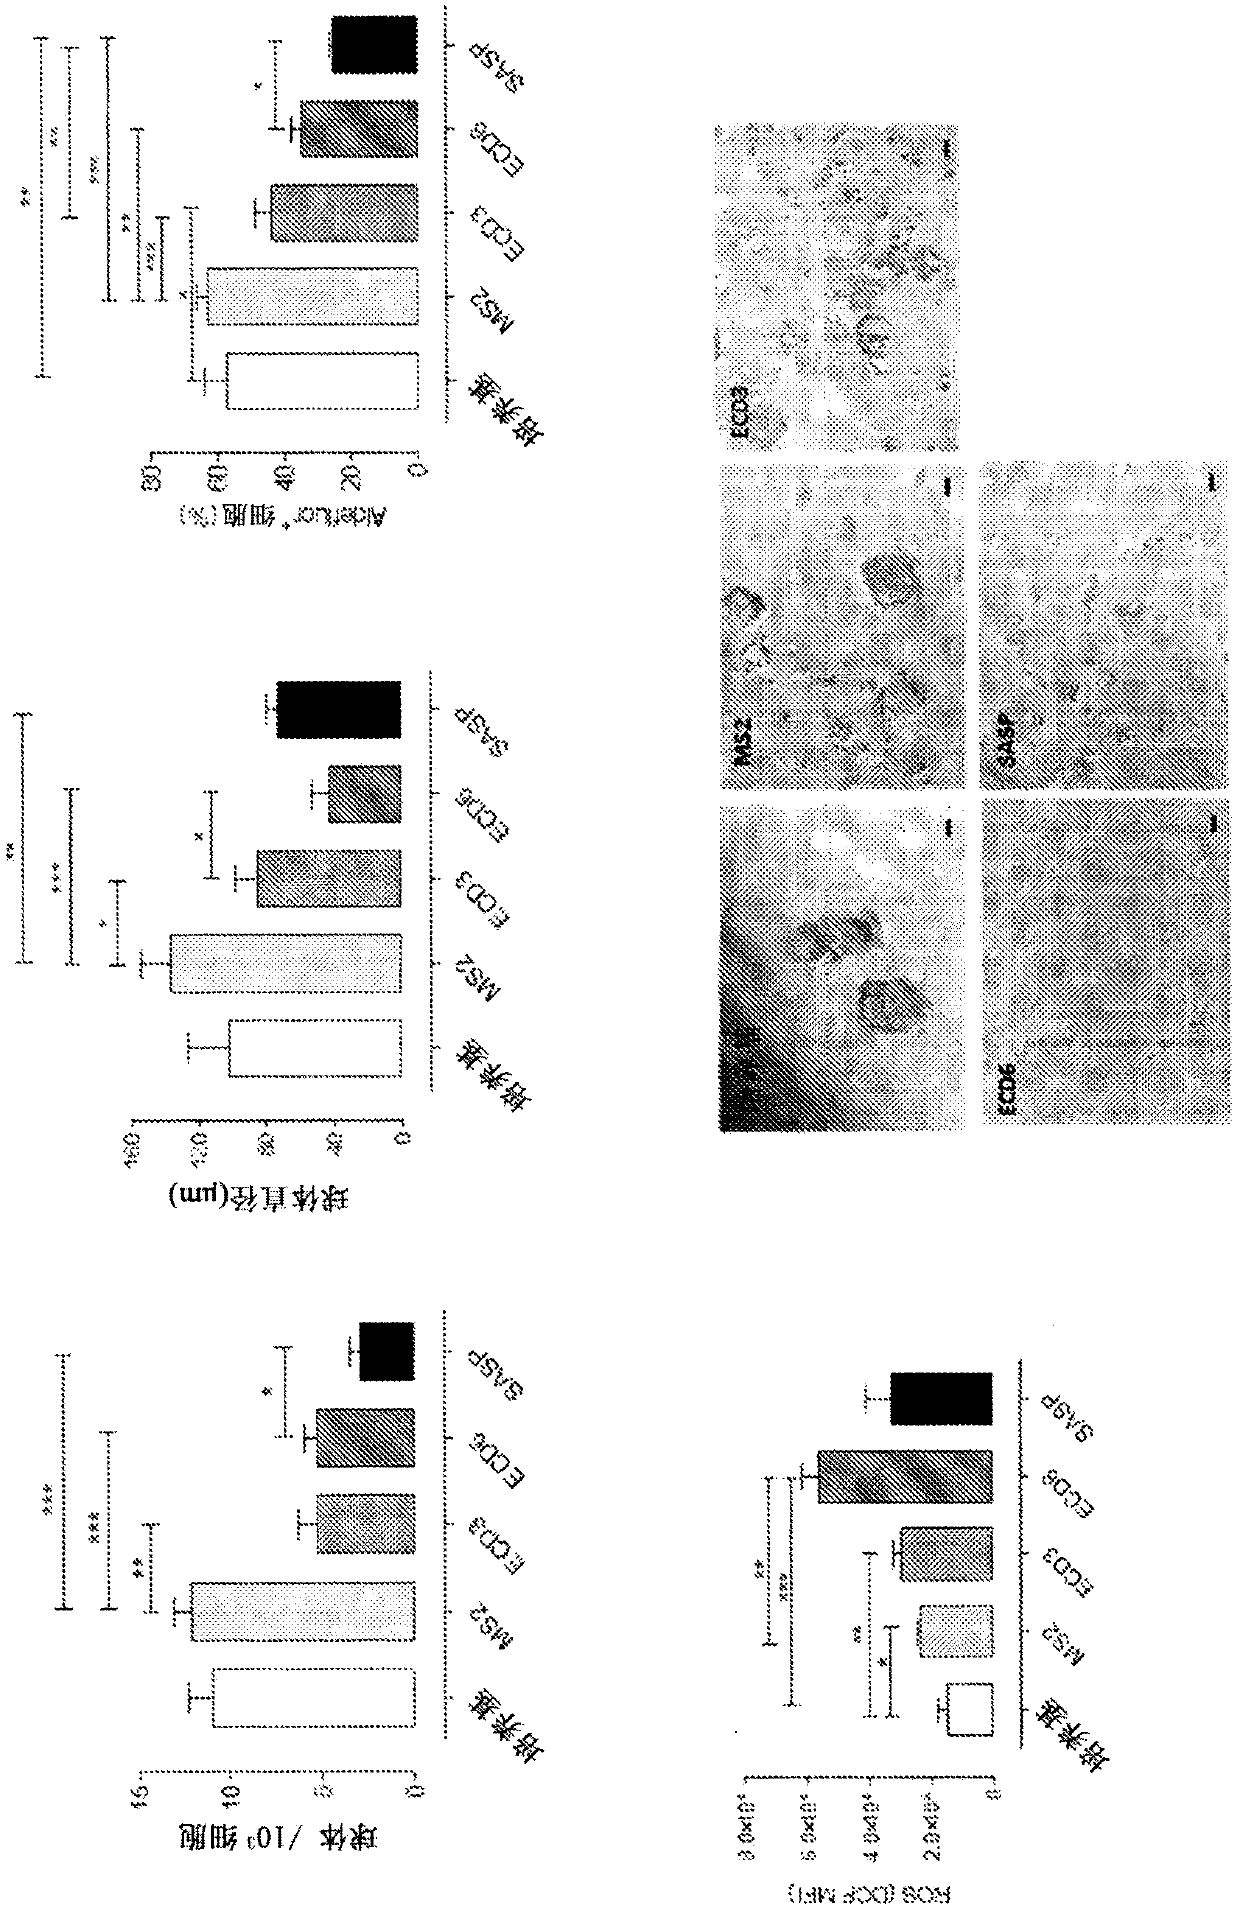 COMPOSITIONS AND METHODS RELATED TO xCT ANTIBODIES